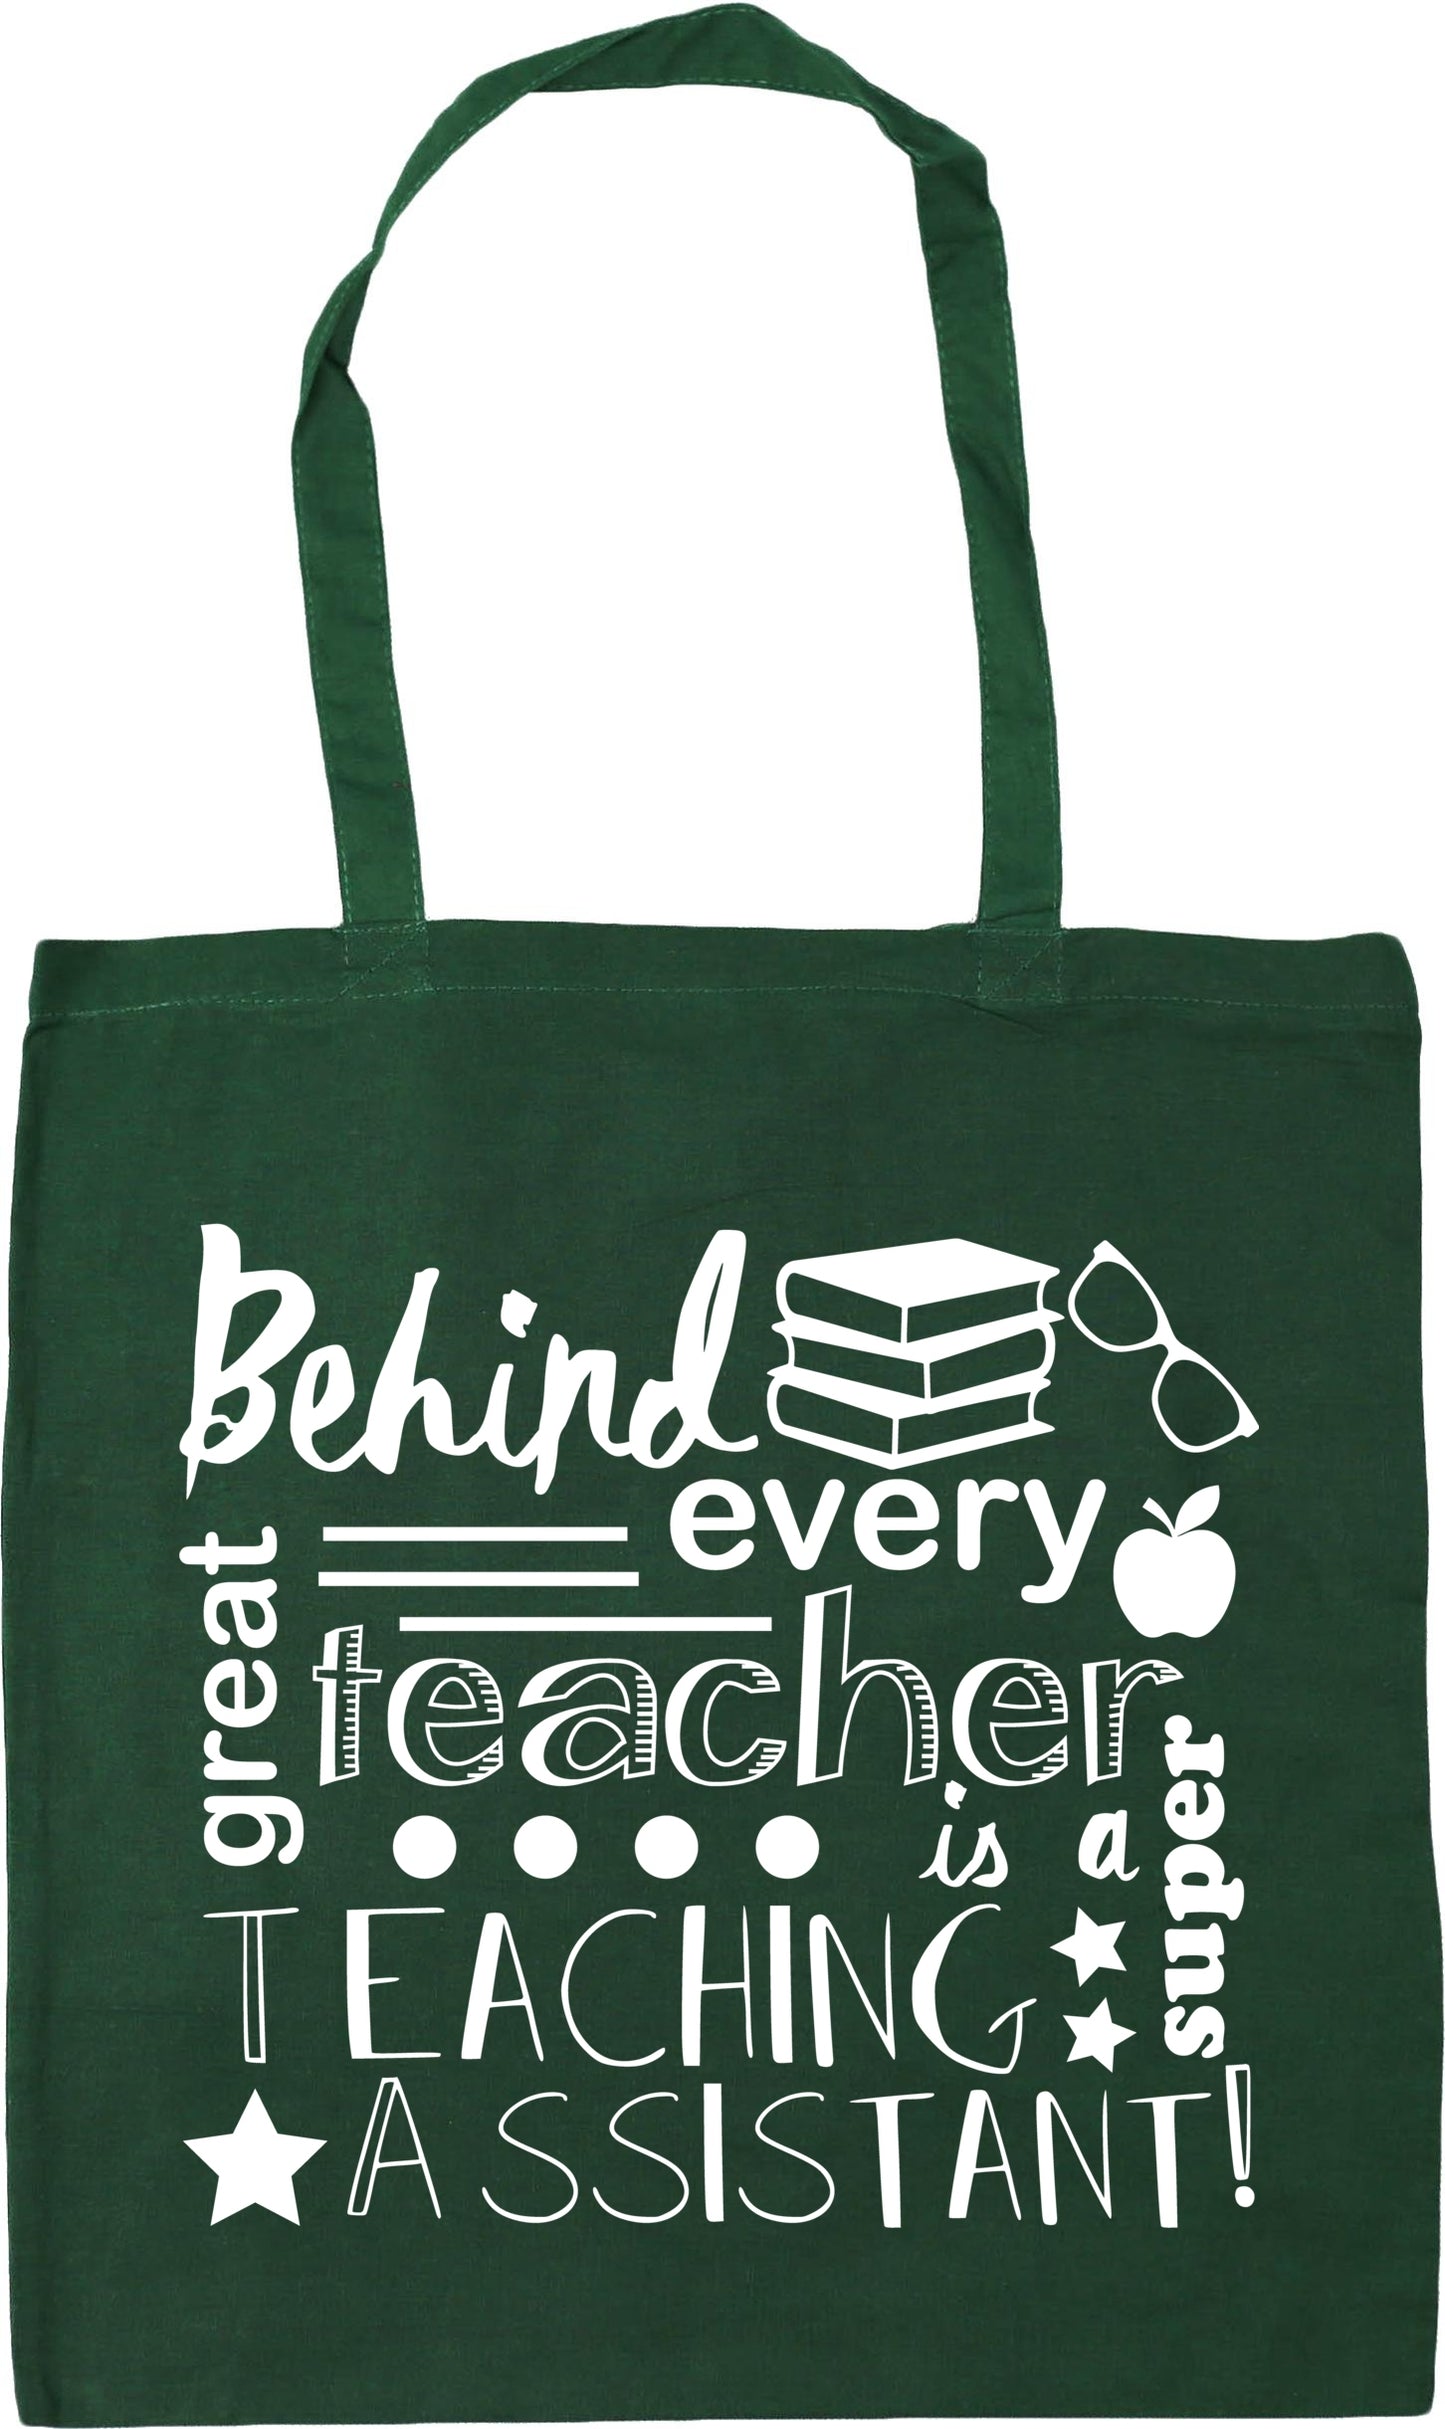 Behind Every Great Teacher Is A Super Teaching Assistant Tote Bag